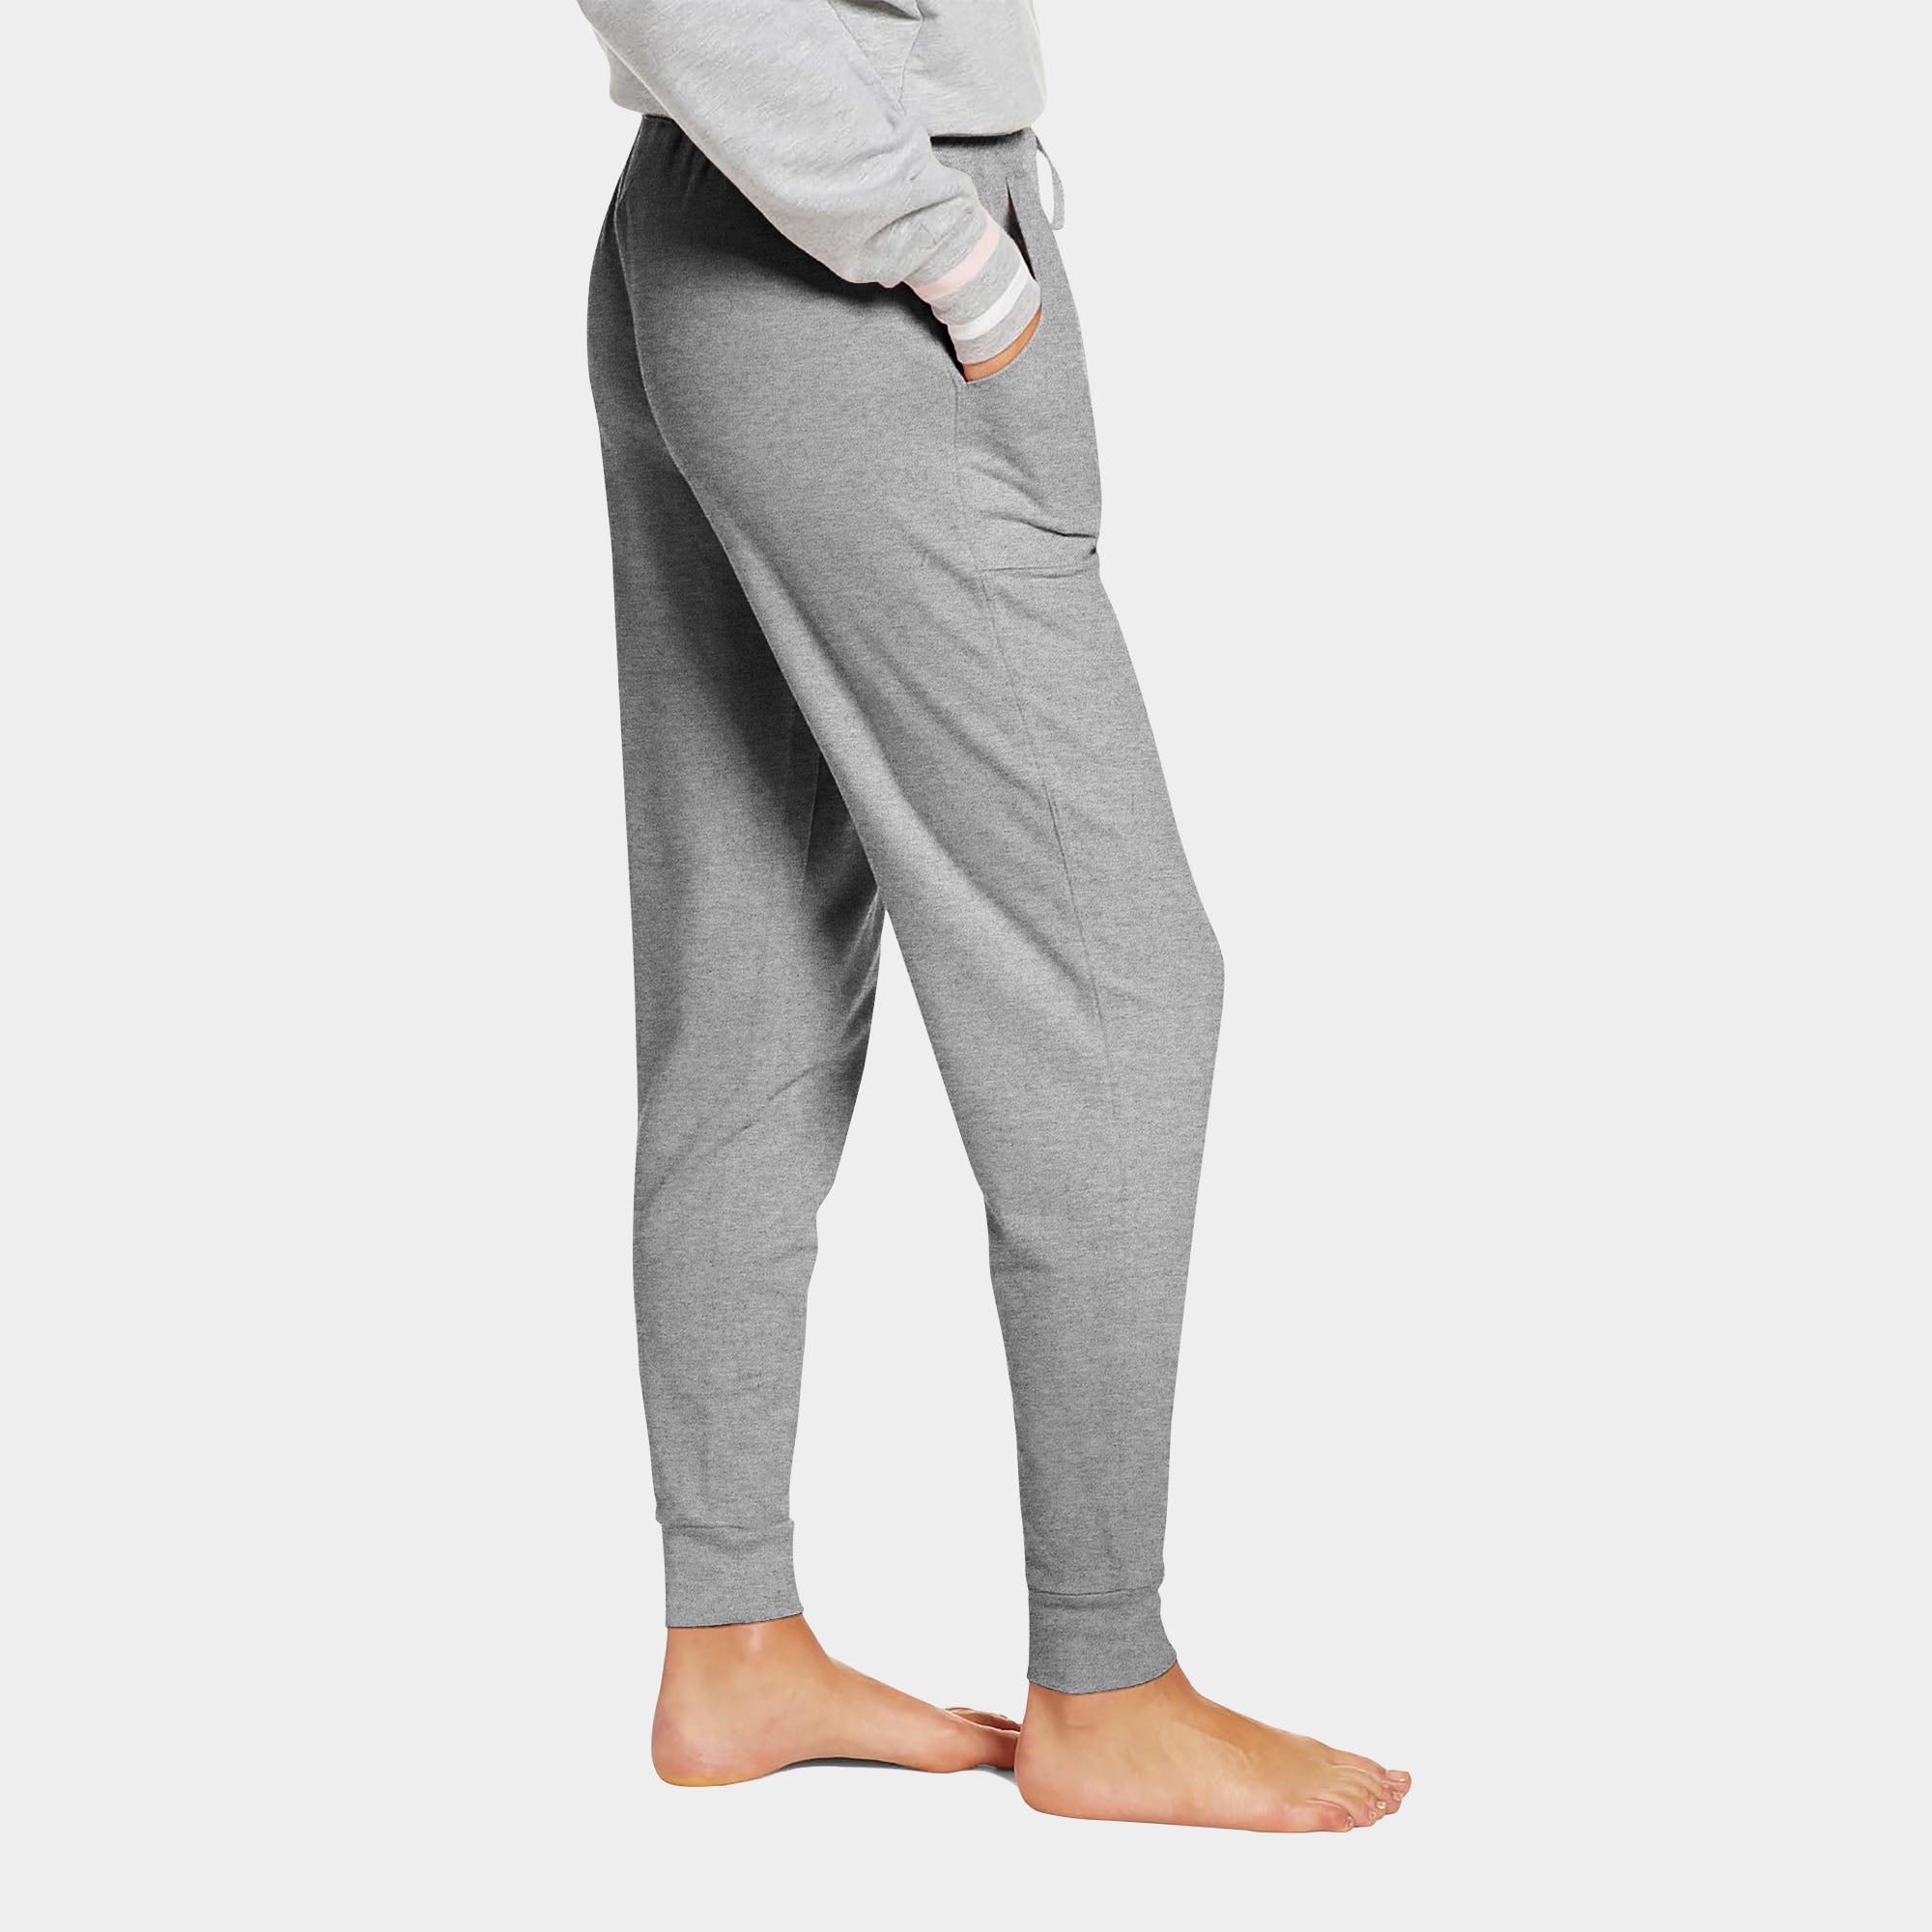 womens fleece sweatpants_yoga joggers_plush inner lining comfort_ribbed cuffs_lady_ladies_sweat for women_activewear_fleece_workout_exercise_weight_pilates_outdoor_indoor_at home_training_running_jogging_hiking_colorfulkoala joggers_yesler_amormio sweatpants_champion_beyond_yoga joggers_nike_rally white_nude sweatpants_lipservice pants_lounge around tan_hanes_teal_fancy_capri_love_french terry_light christmas cotton_Medium Gray